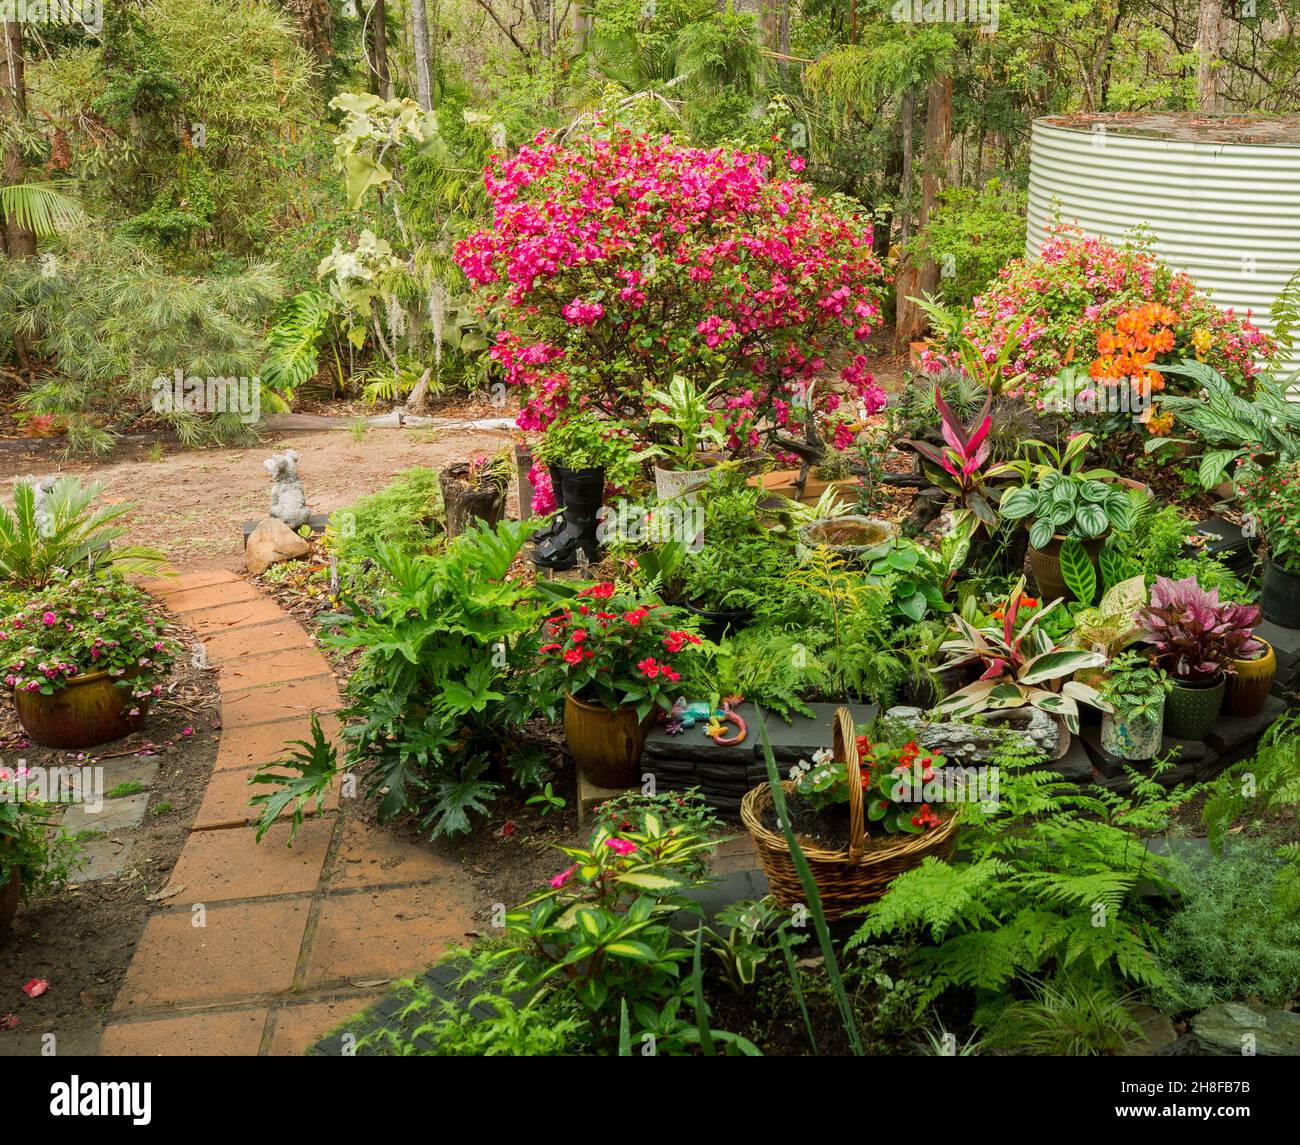 Spectacular colourful tropical garden with lush ferns & flowering plants, many in containers, with low wall and pathway, in Australia Stock Photo